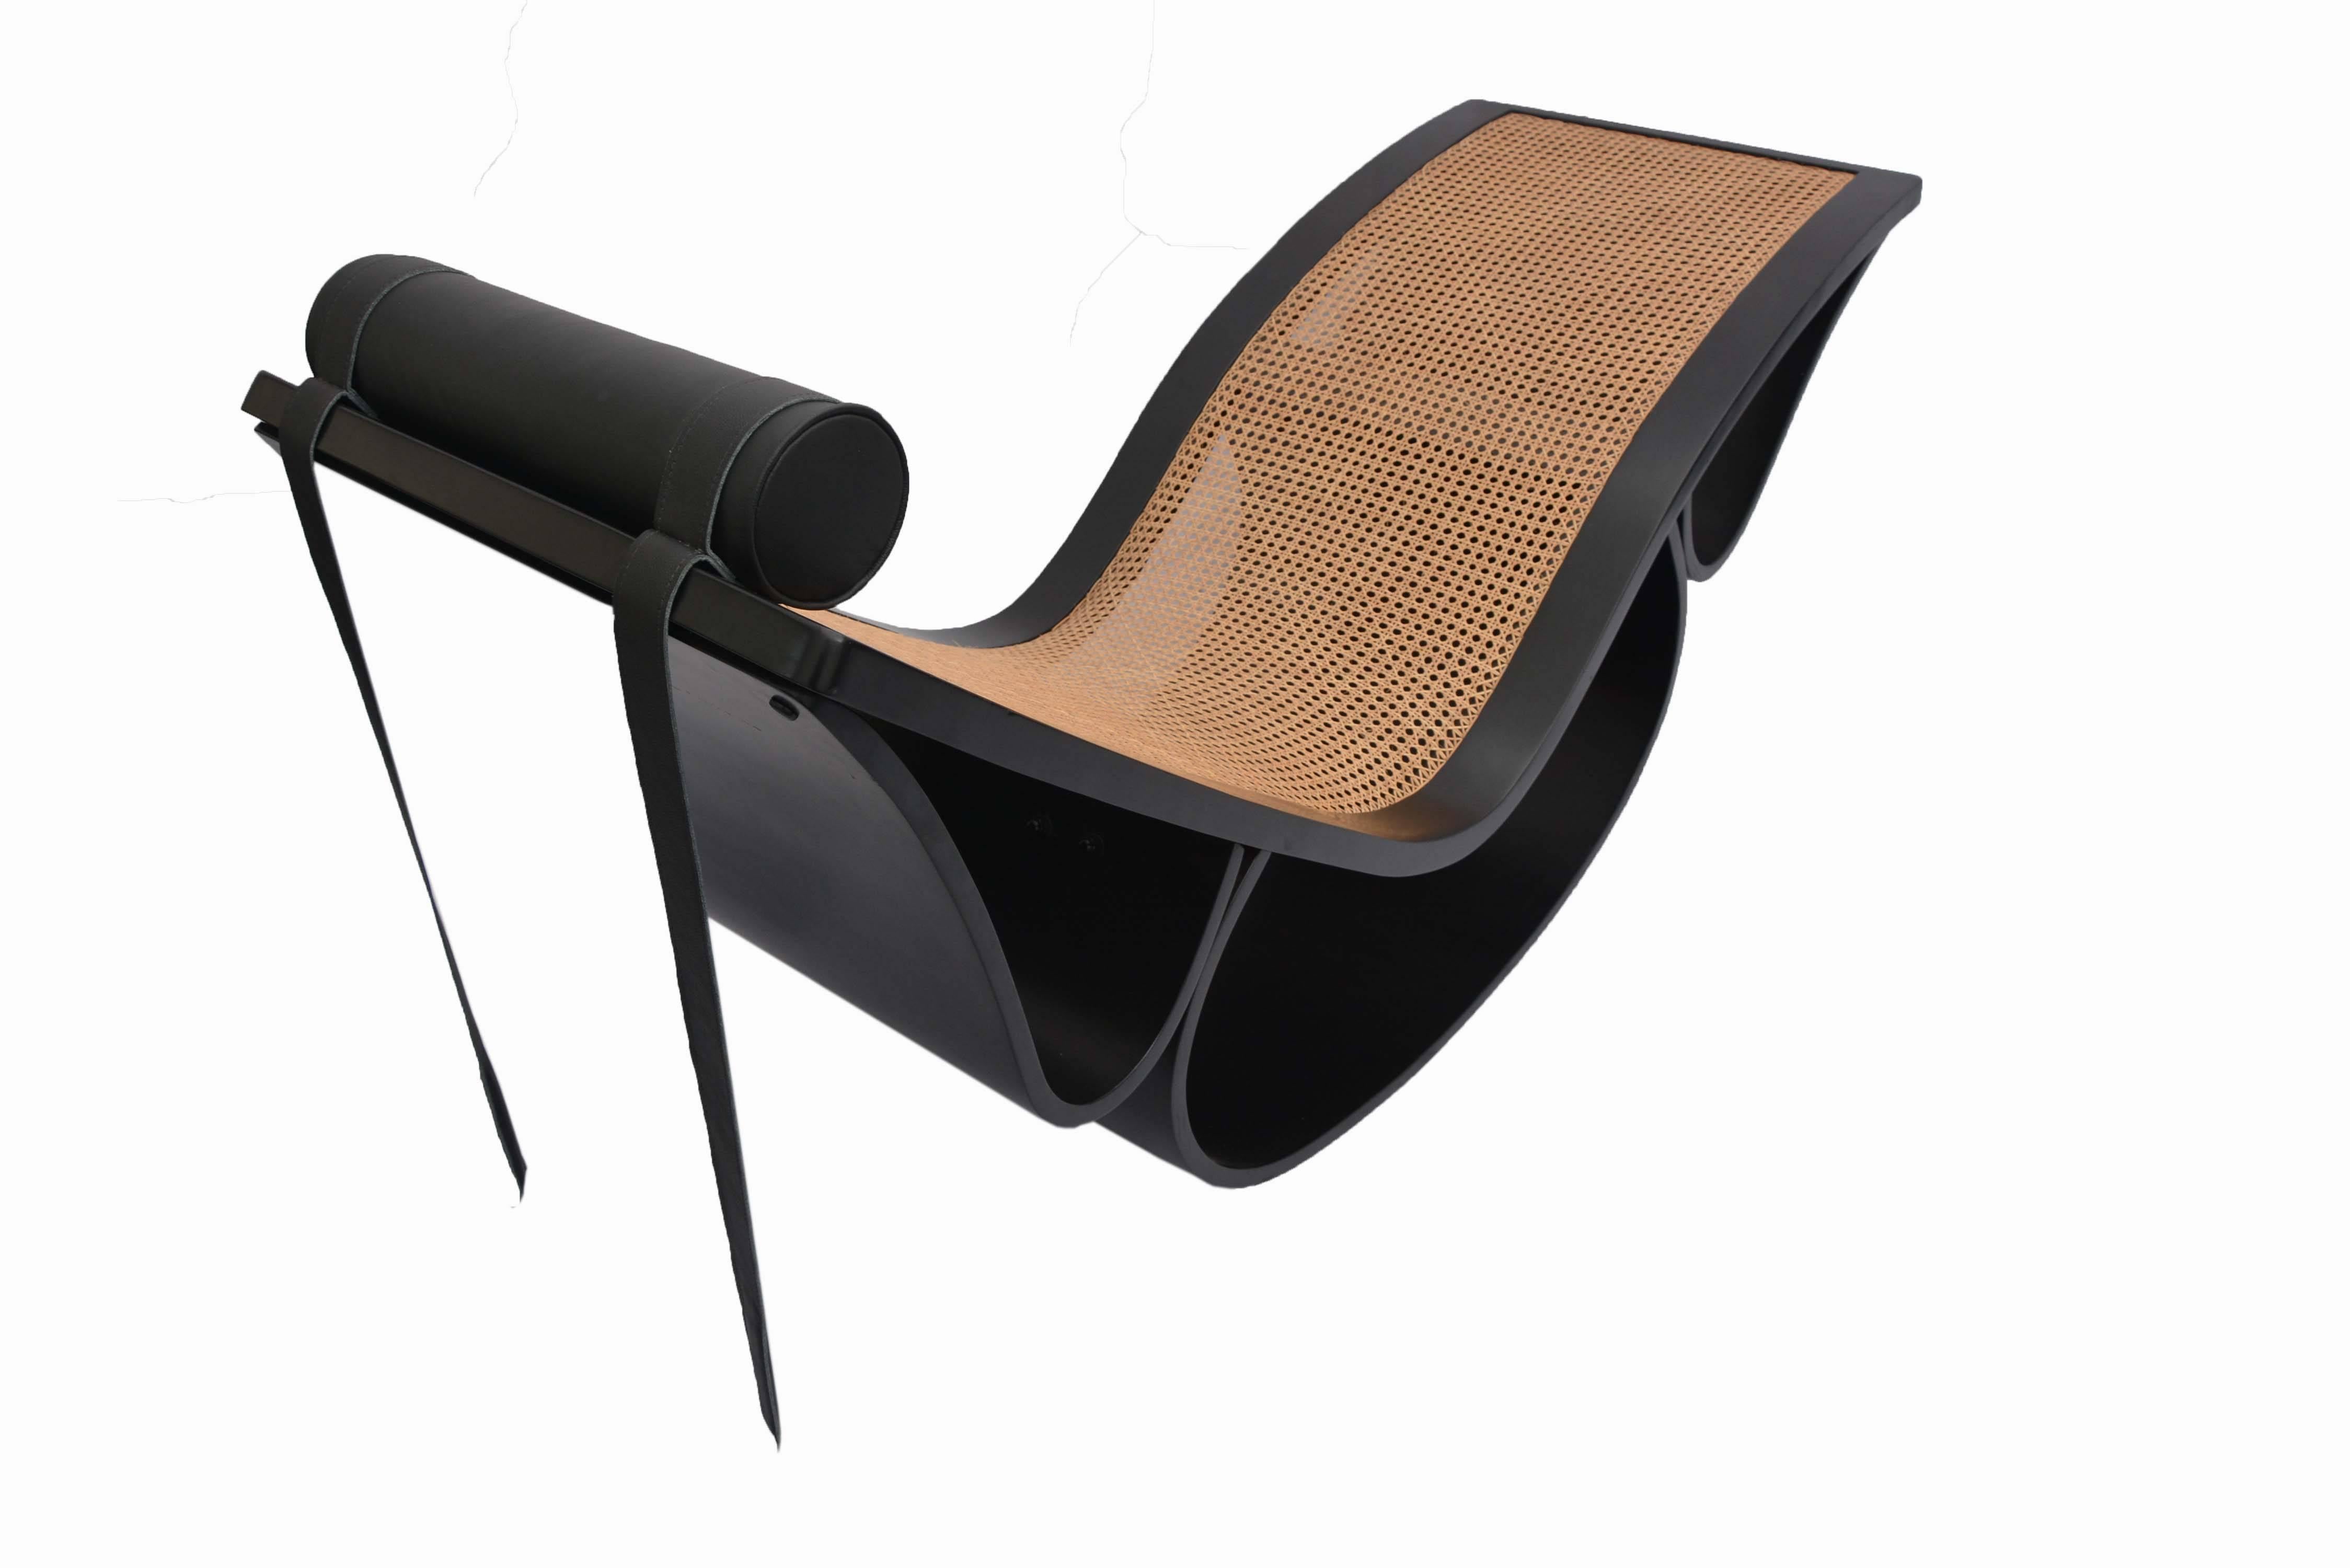 An amazing example of Oscar Niemeyer's design: All original vintage chaise longue in bentwood and caning with a counter balanced leather headrest.